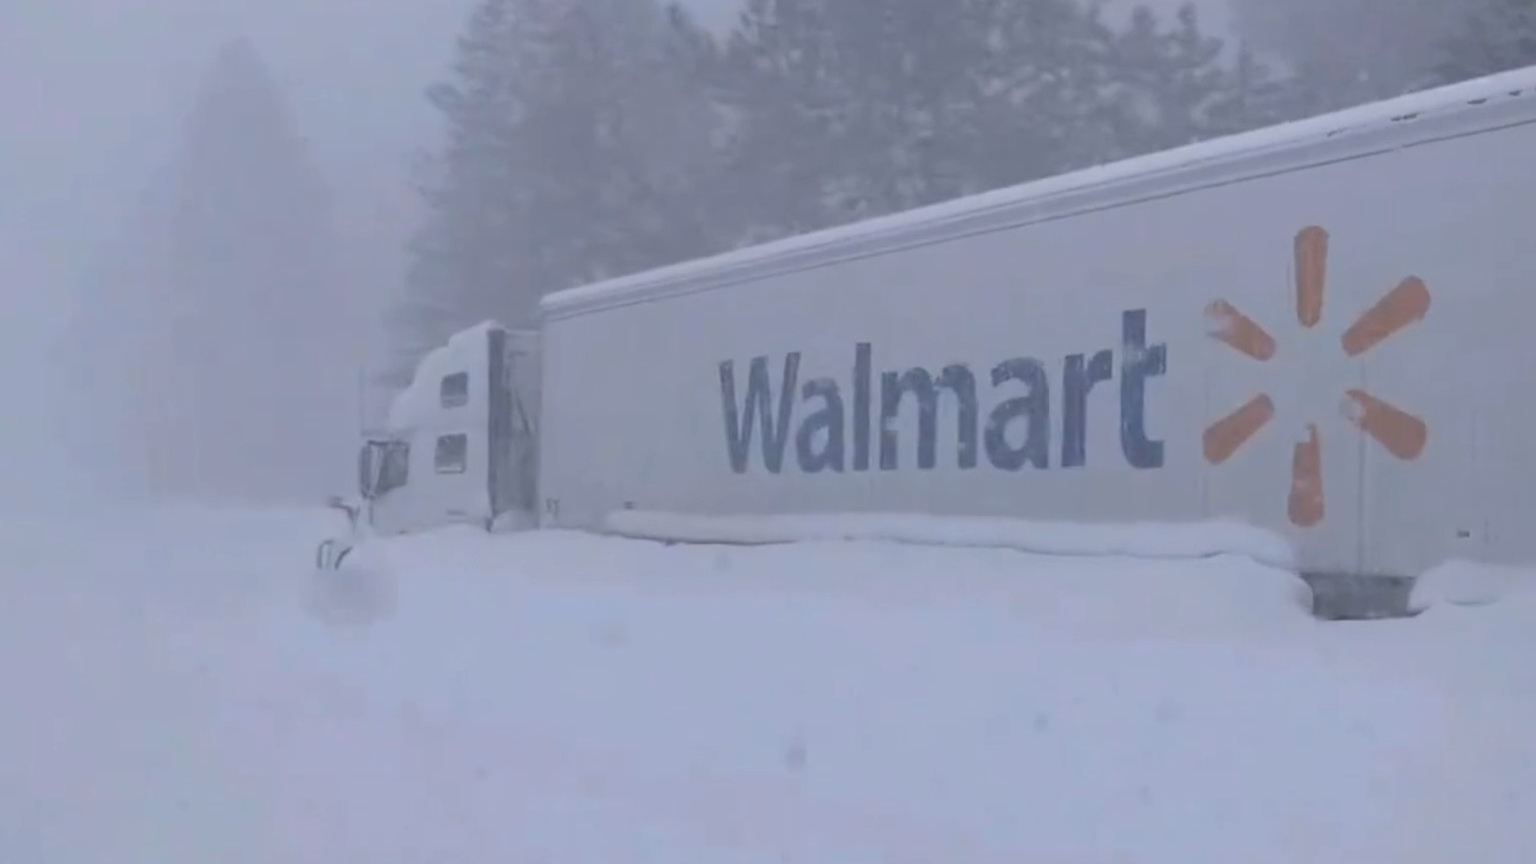 Parts of the US hit with powerful winter blizzard